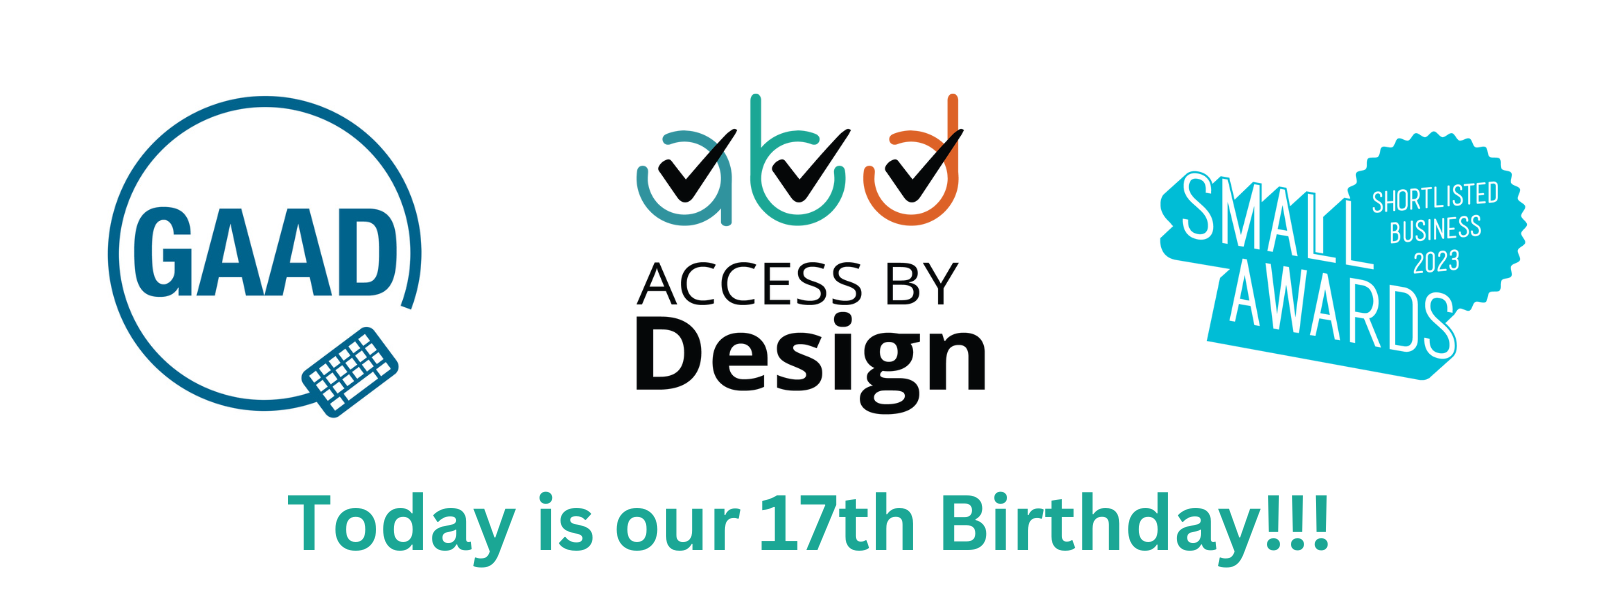 GAAD Logo, Access by Design Logo, Small Awards 2023 Logo. The text reads “Happy GAAD everyone!!! Today is also our 17th Birthday!201D